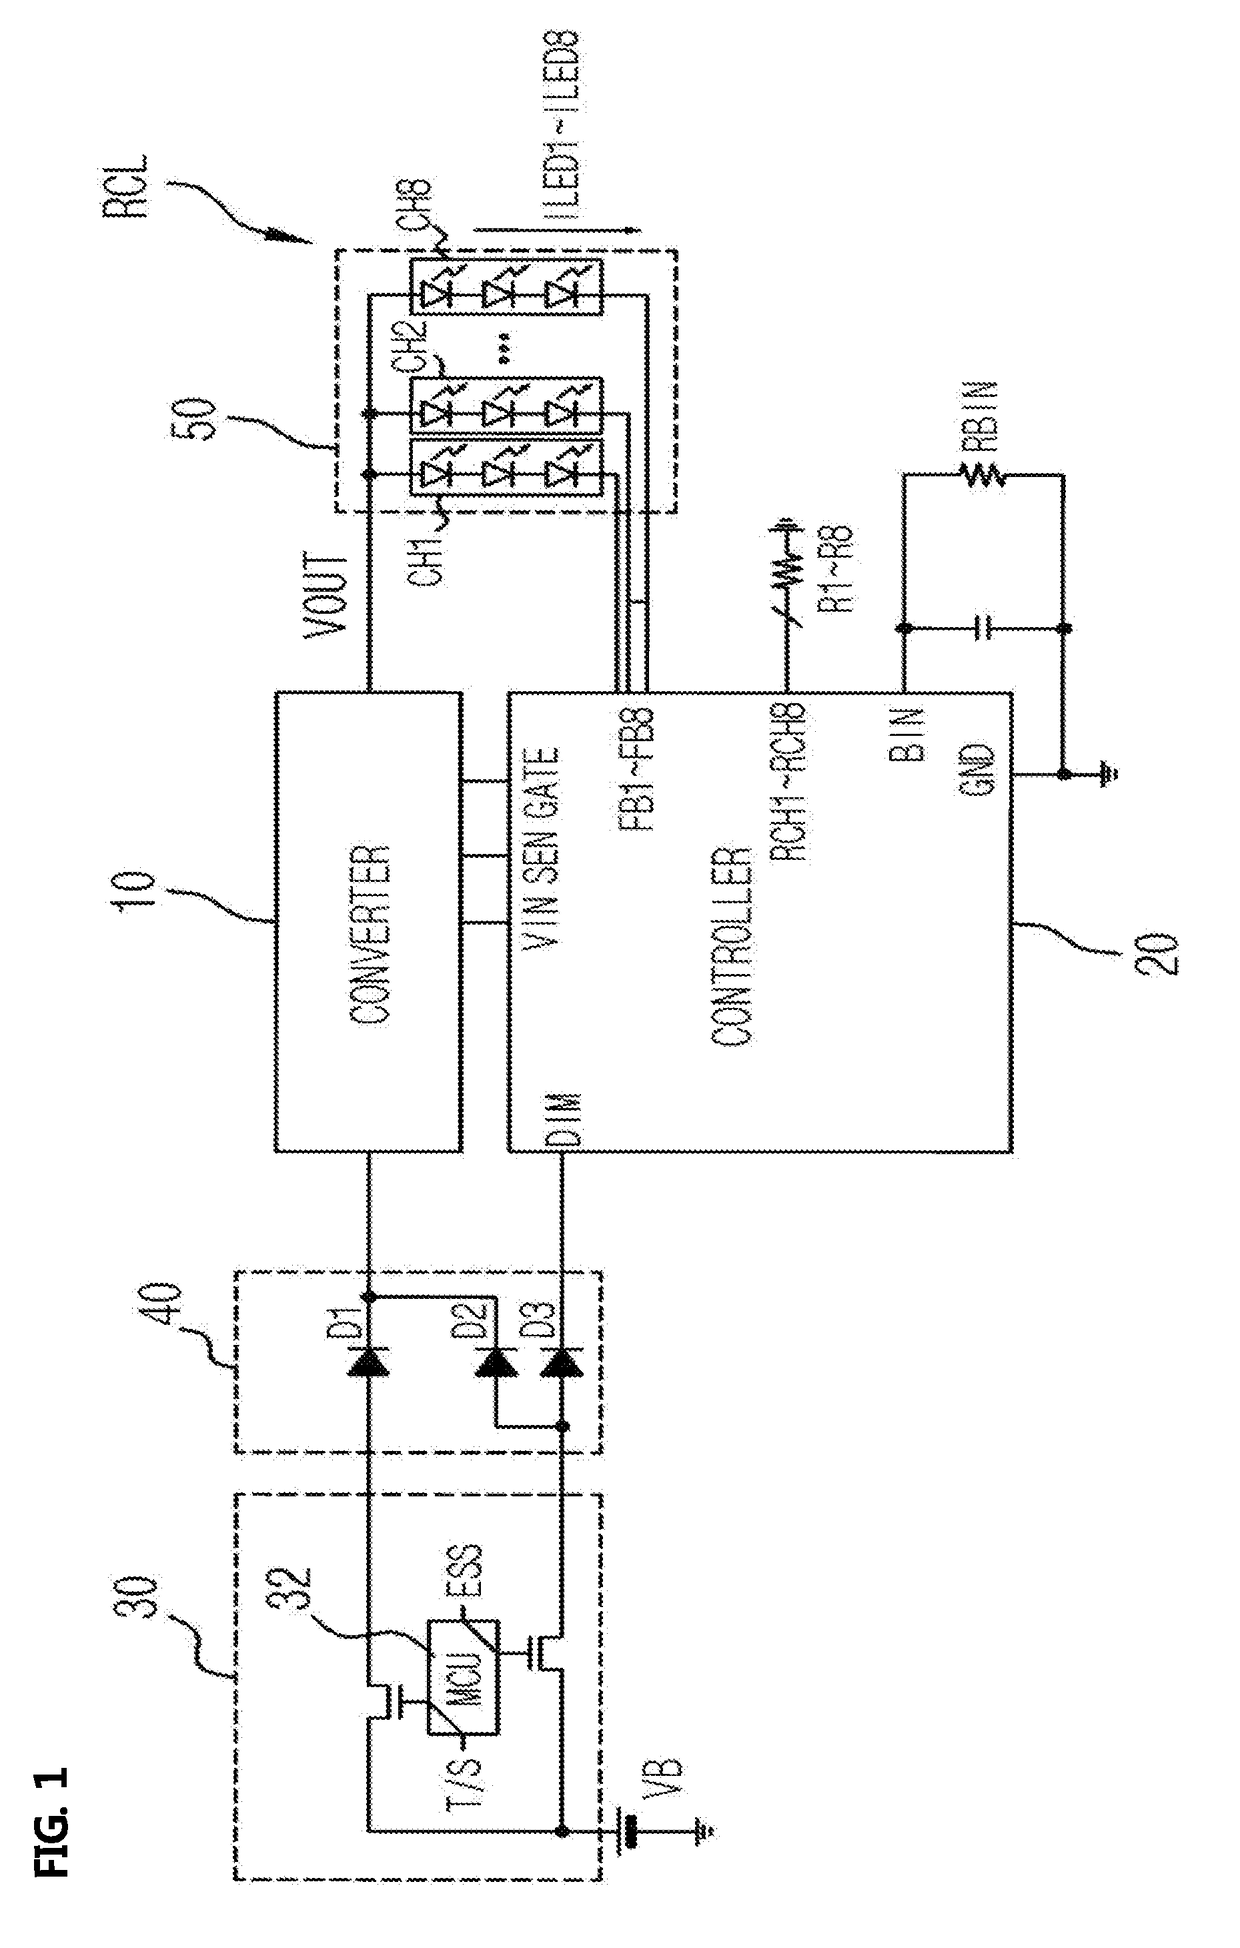 Lamp control device and control method therefor